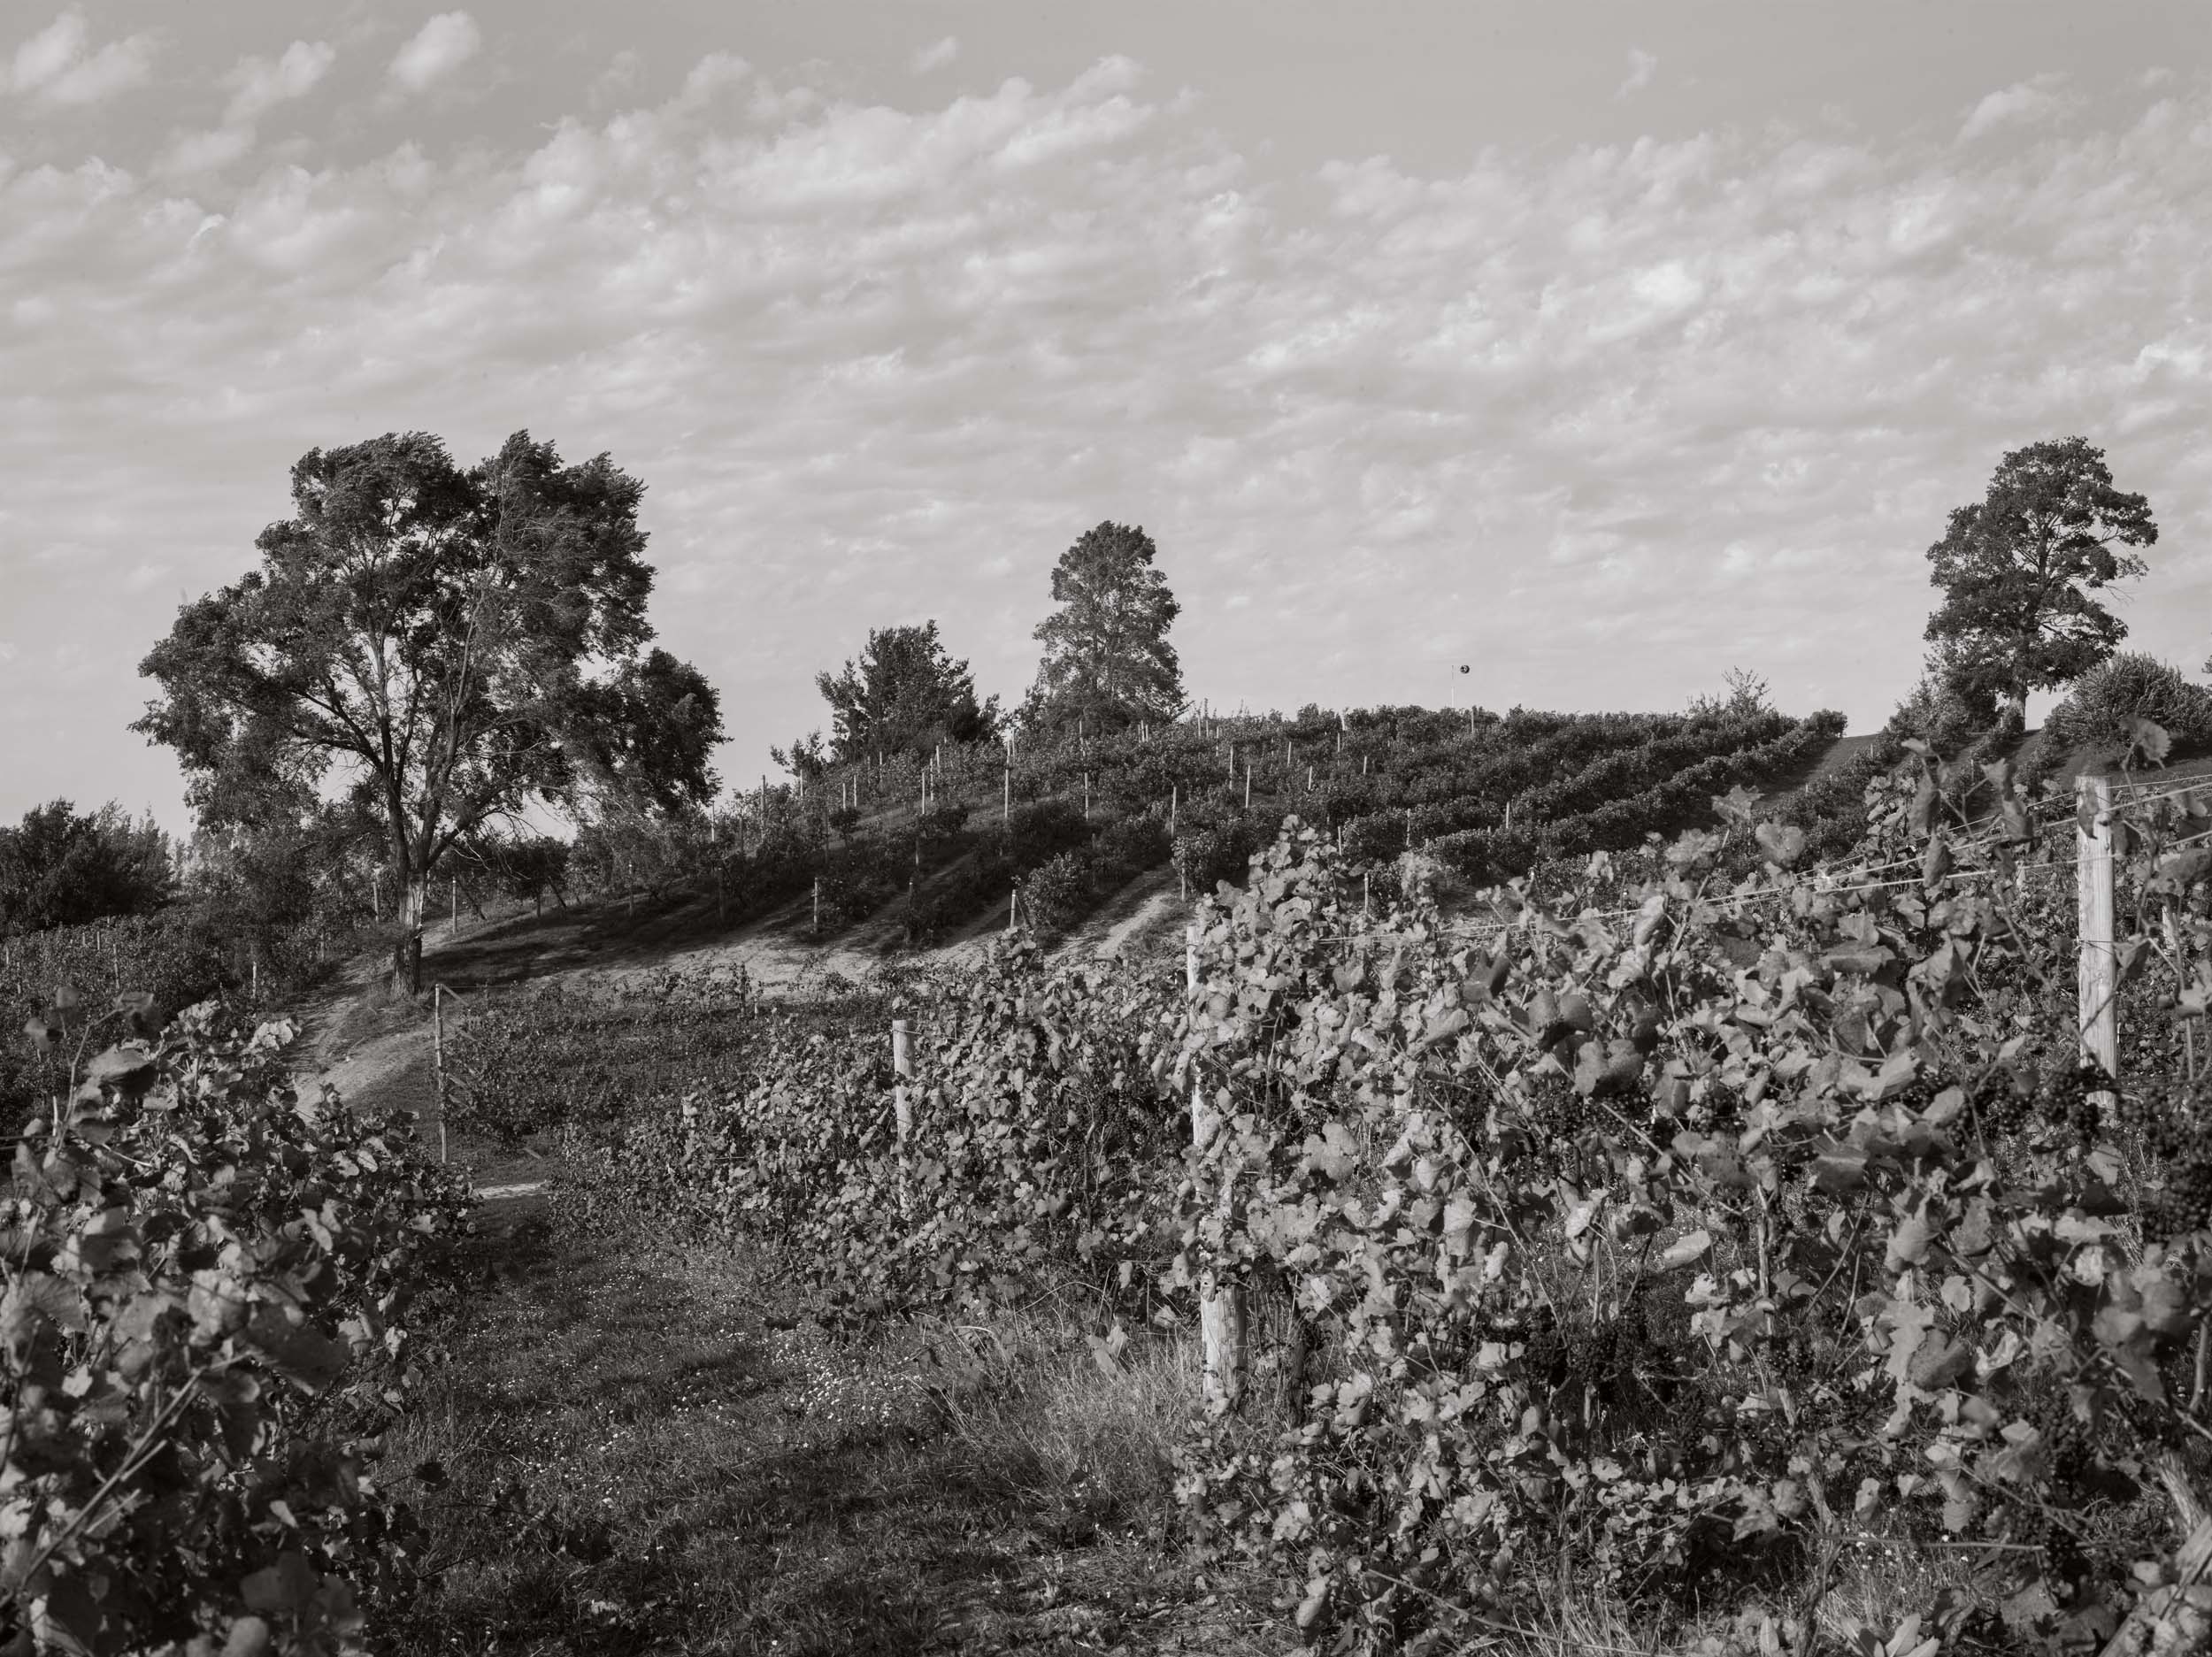 LATE HARVEST - Ciccone Vineyard, Sutton Bay. A classic pastoral Michigan scene that would make Tuscany jealous. Michigan Landscape Photography.